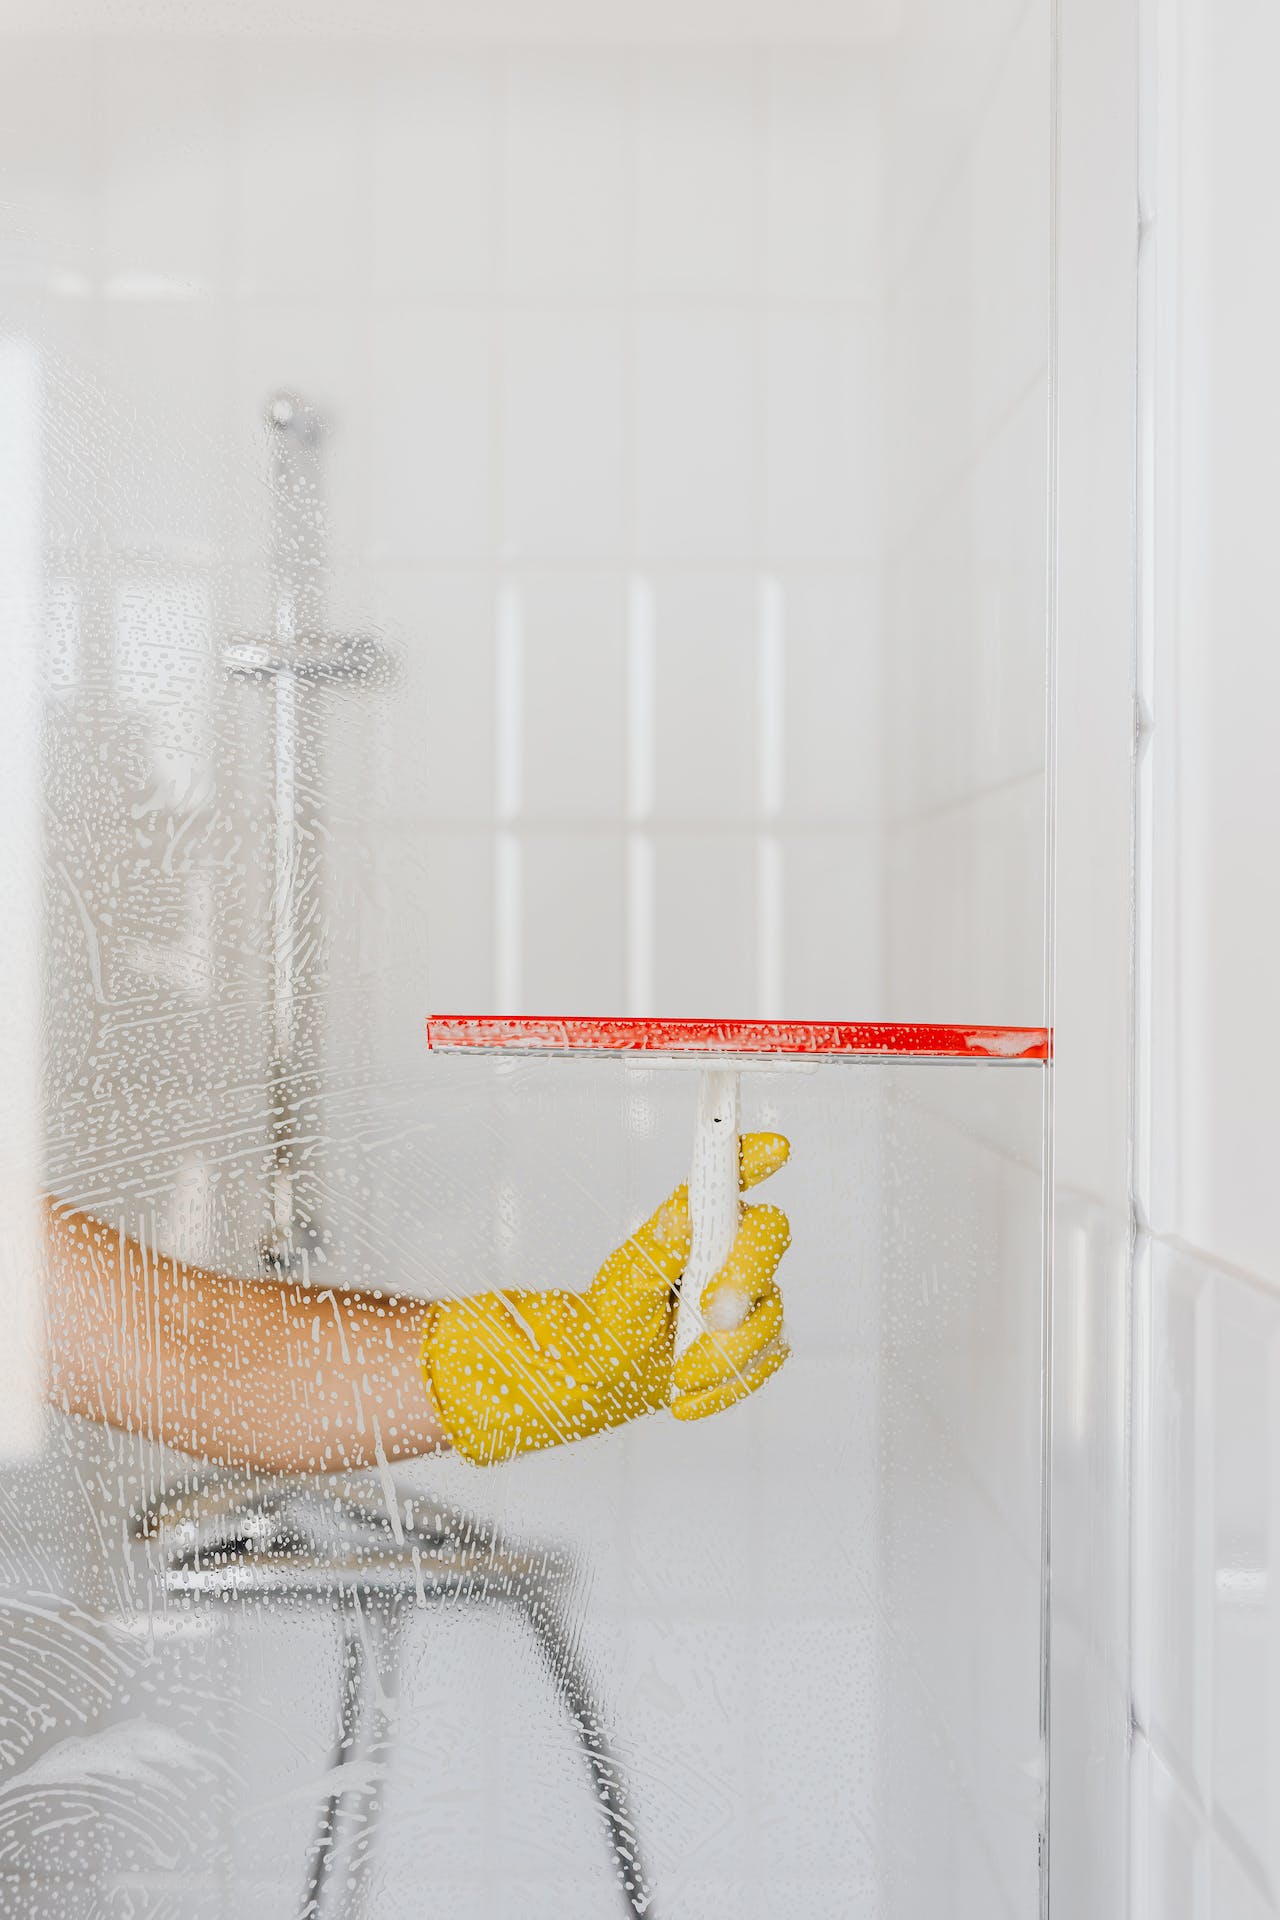 How to Keep Cleaning Supplies Safe and in Good Condition?